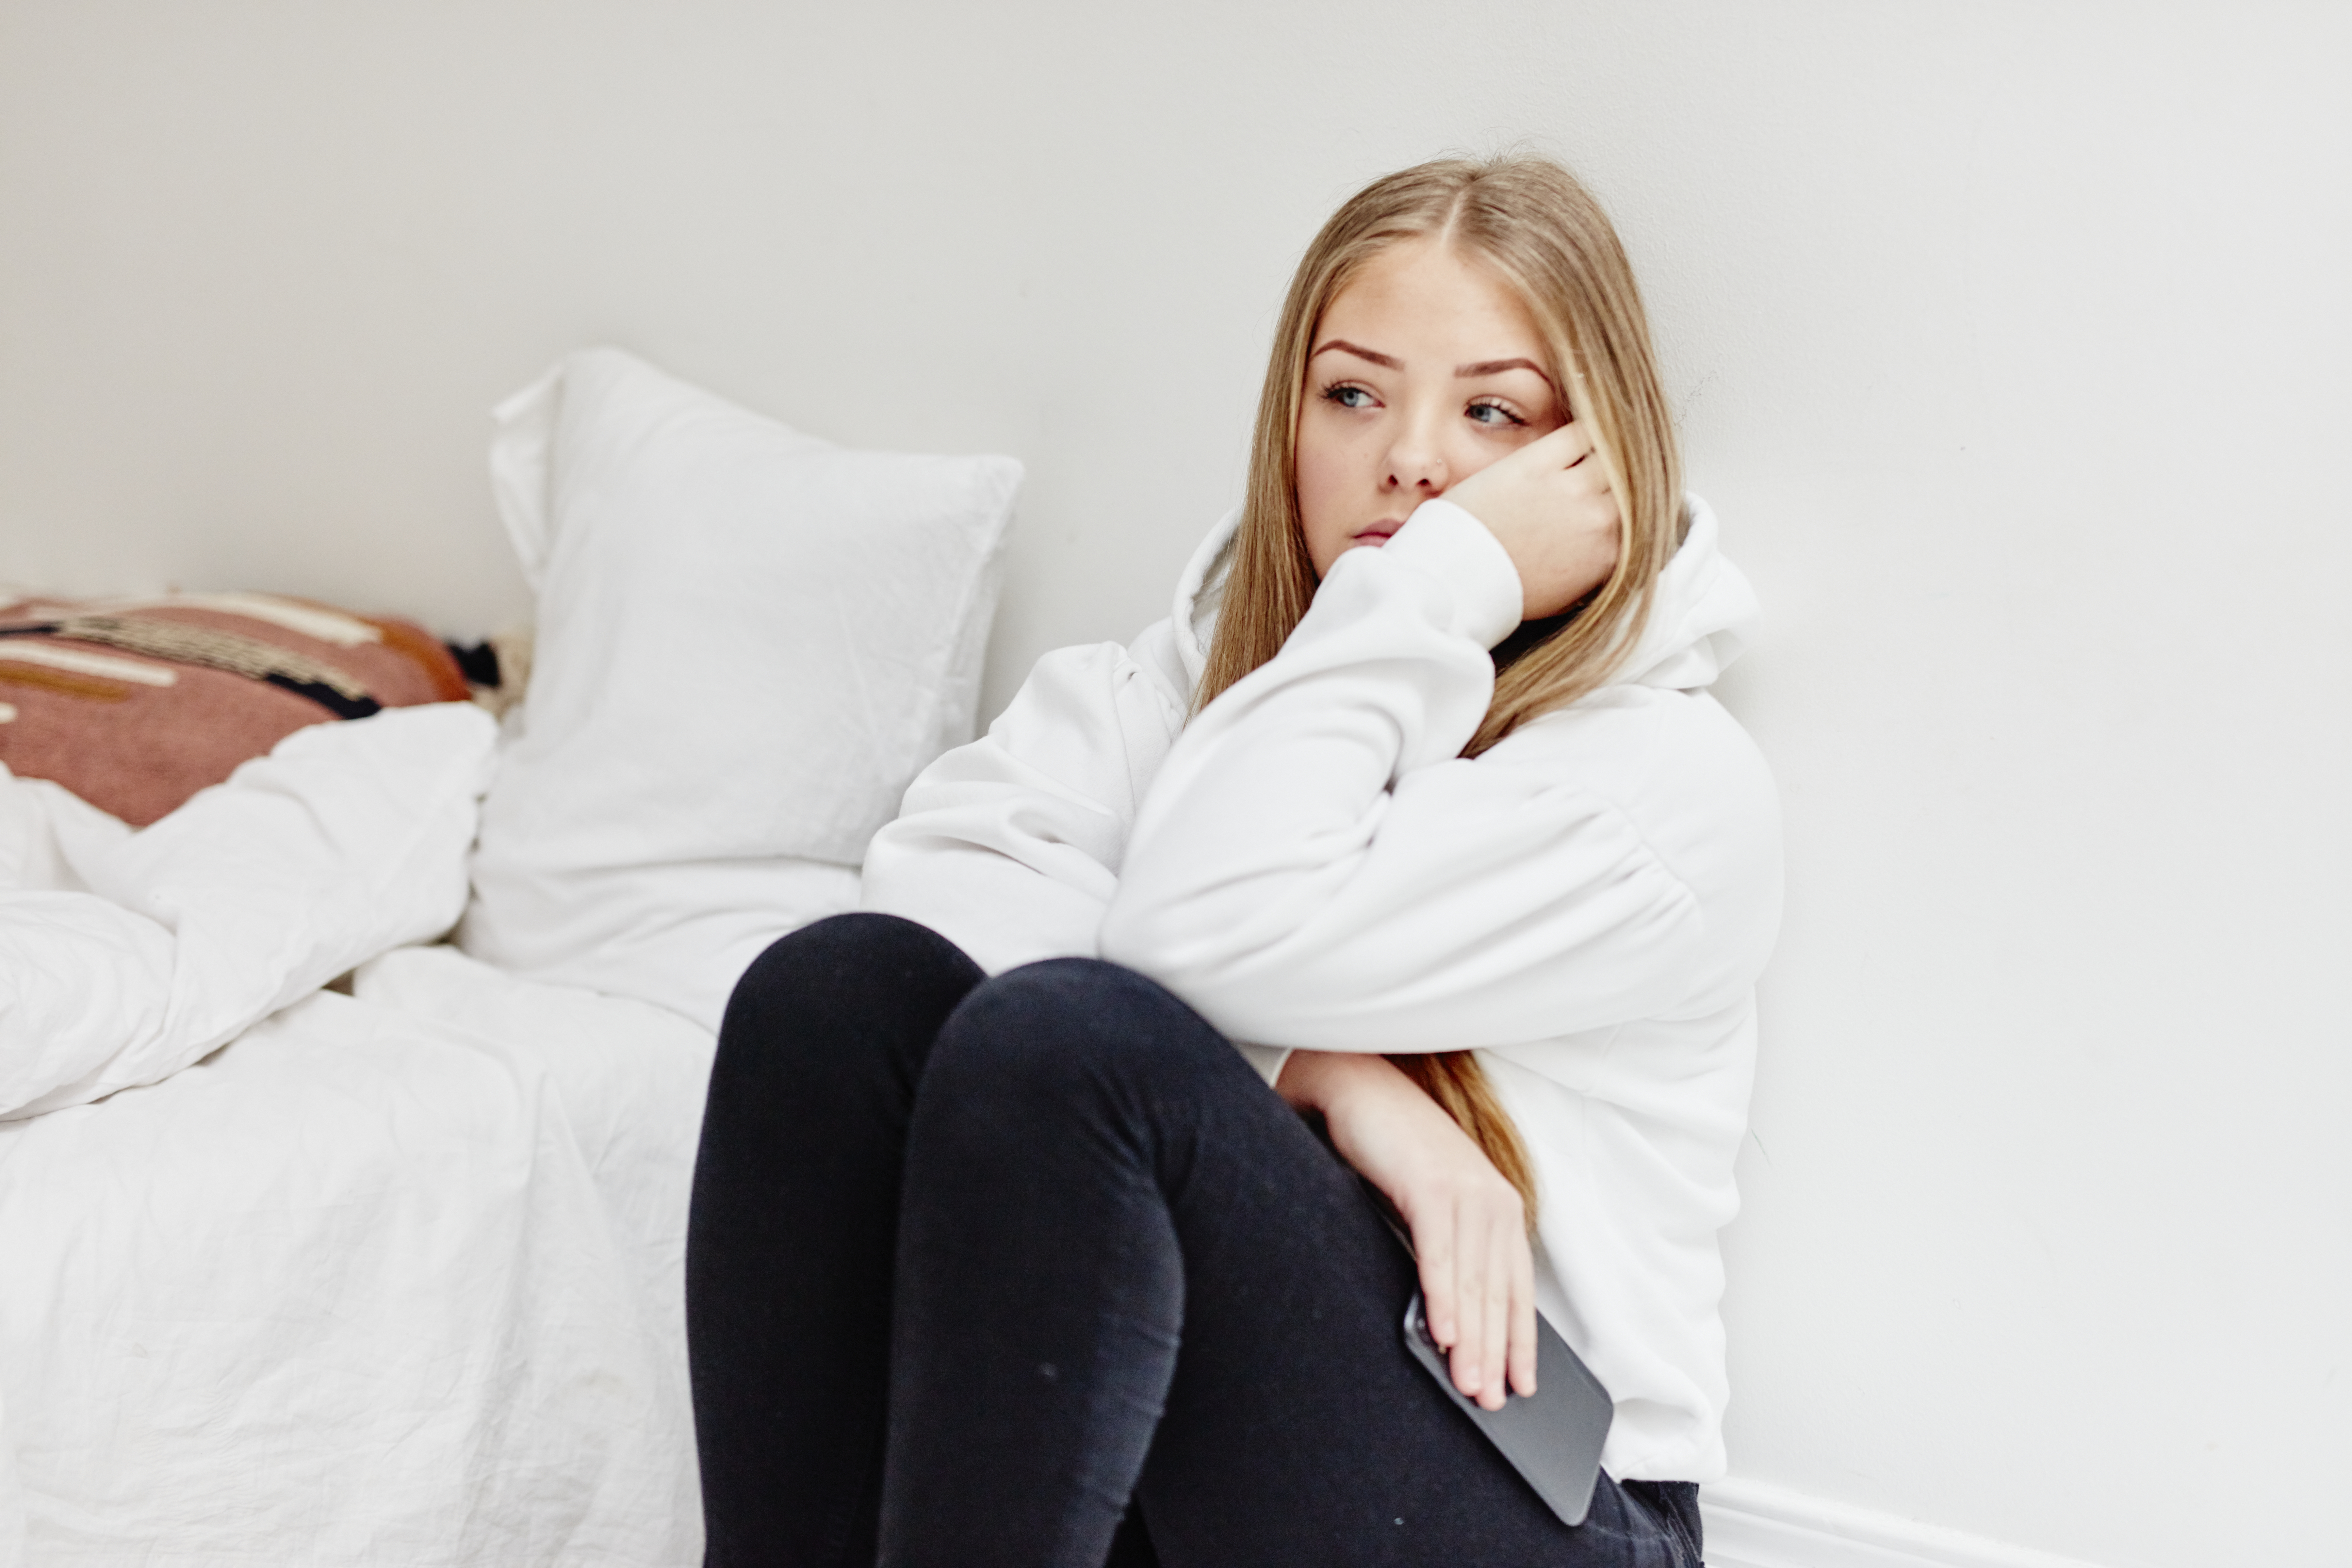 Worried woman sitting in bedroom | Source: Getty Images